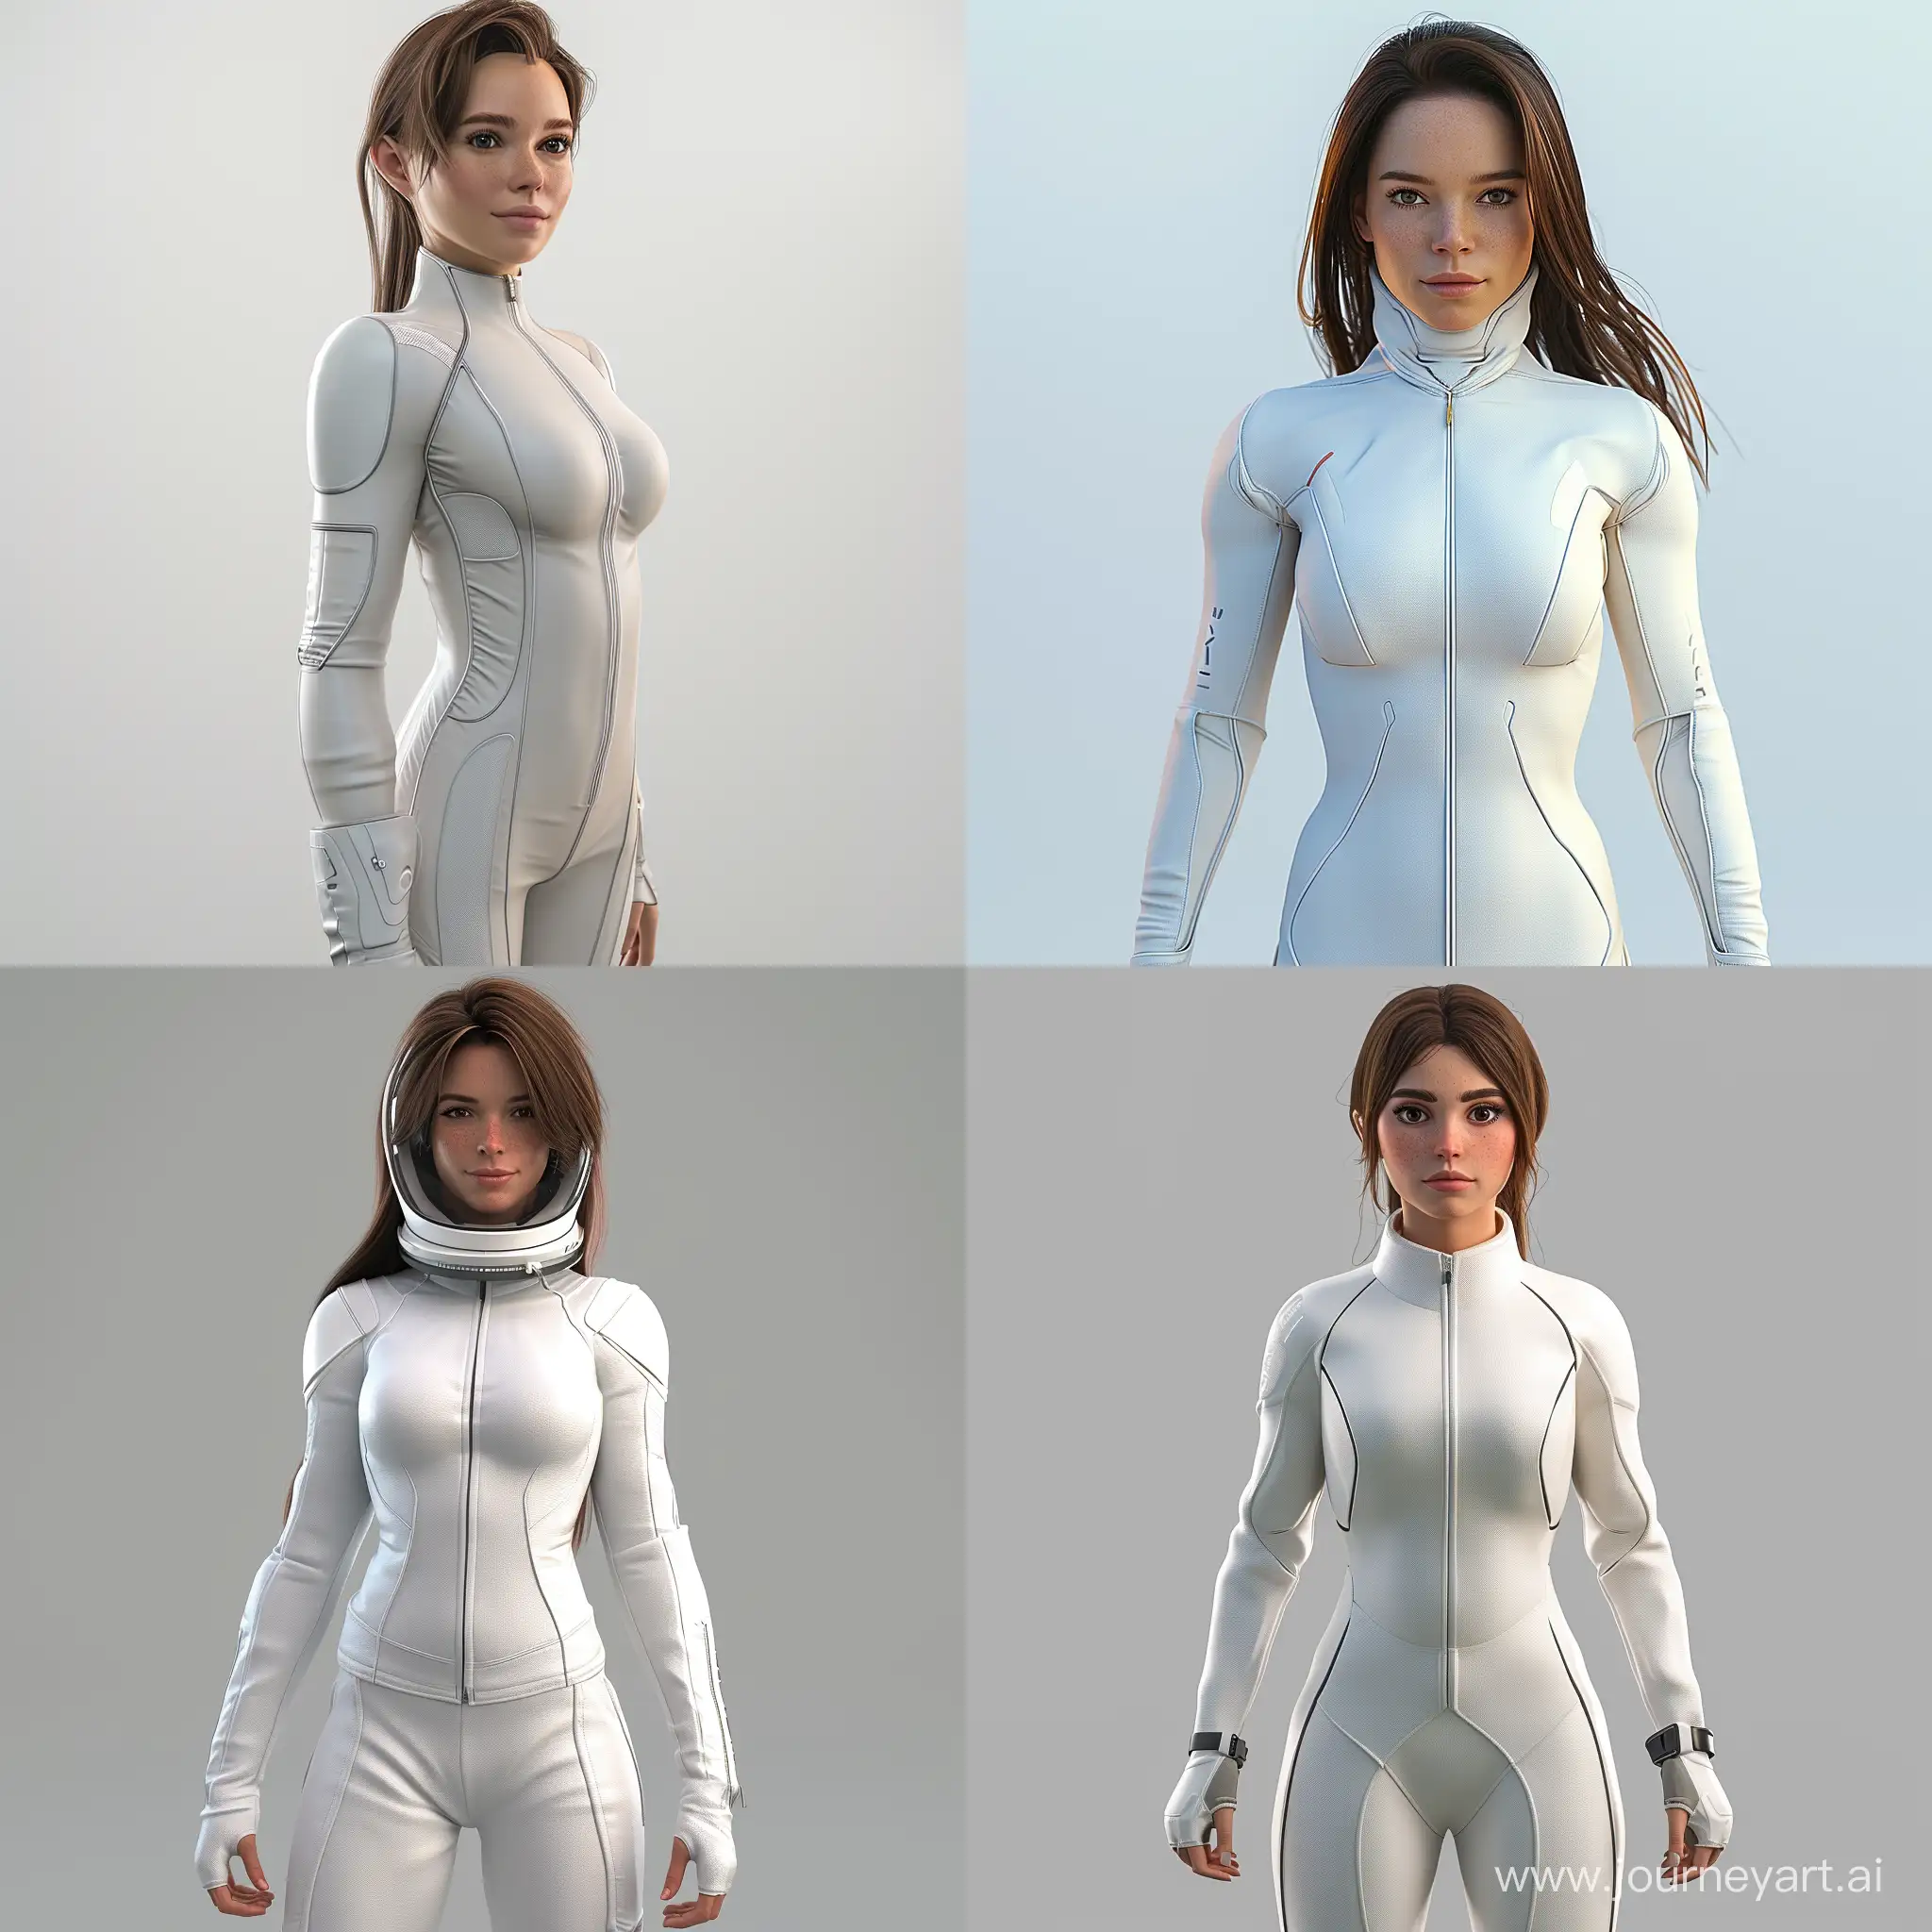 Elon Musk is a confident and beautiful woman in 3d 4k style. She exudes a sense of power and strength with her presence. Her sharp features and unique style captivate those around her. She is a trailblazer and loves risk. Her intelligence and ambition are inspiring. Elon Musk is a girl who changes the world. She wears a white space suit tracksuit without a helmet and has brown hair. Draw her body and face.